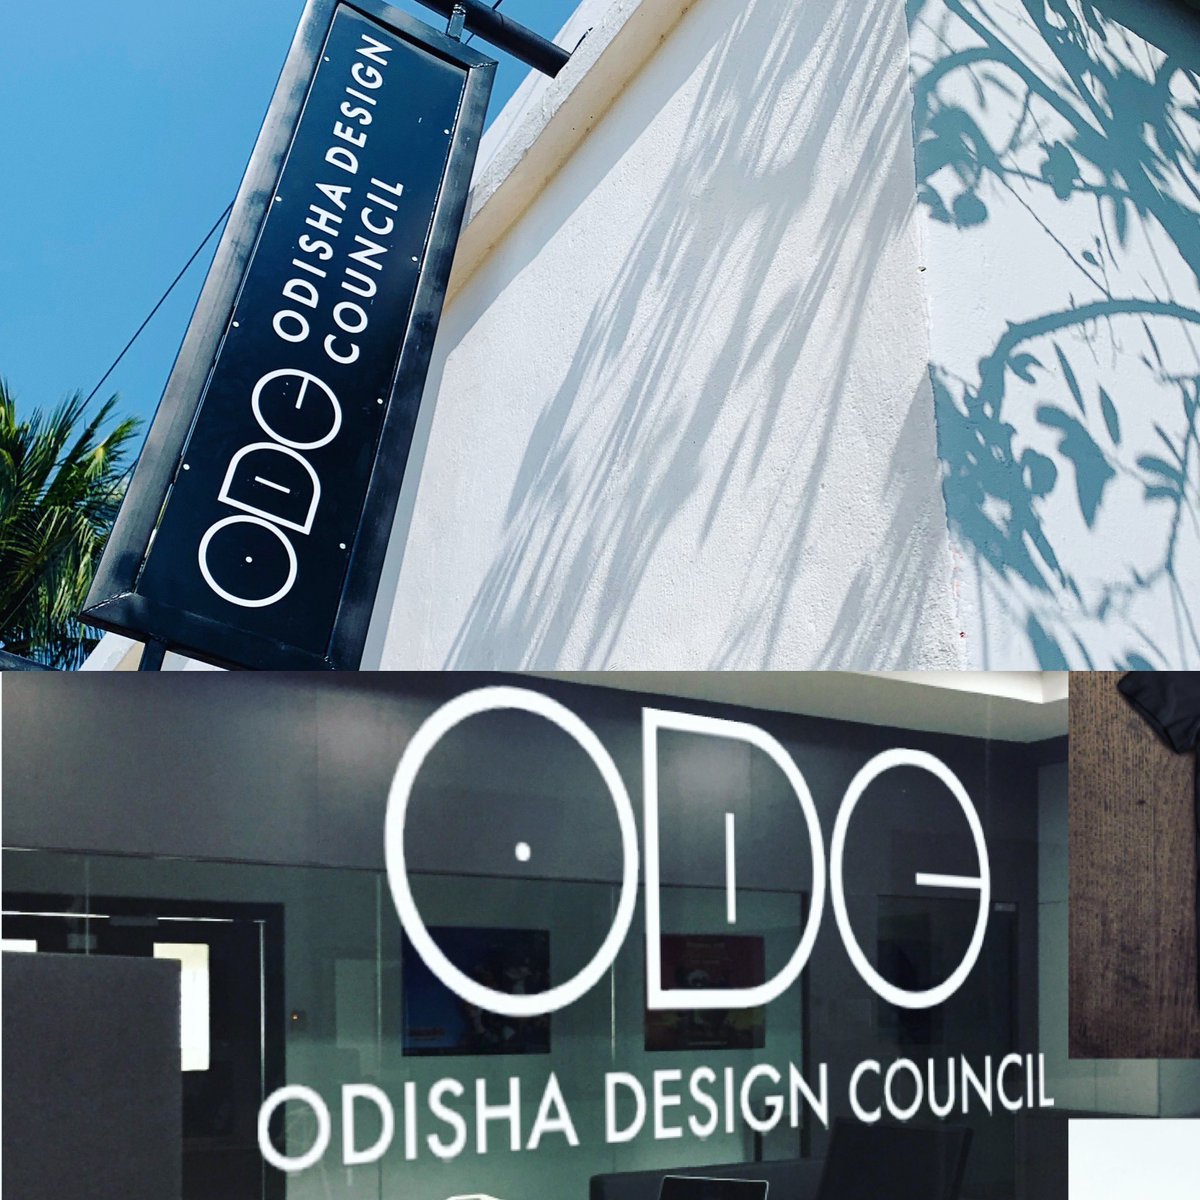 Excited to announce my return to #Odisha as Chairman at #ODC - #OdishaDesignCouncil! Ready for a new chapter of opportunities, challenges, and driving progress in design, #smartcities, IT, #tourism, and more. Let's make a meaningful impact together! #DesignForOdisha @DesignODC